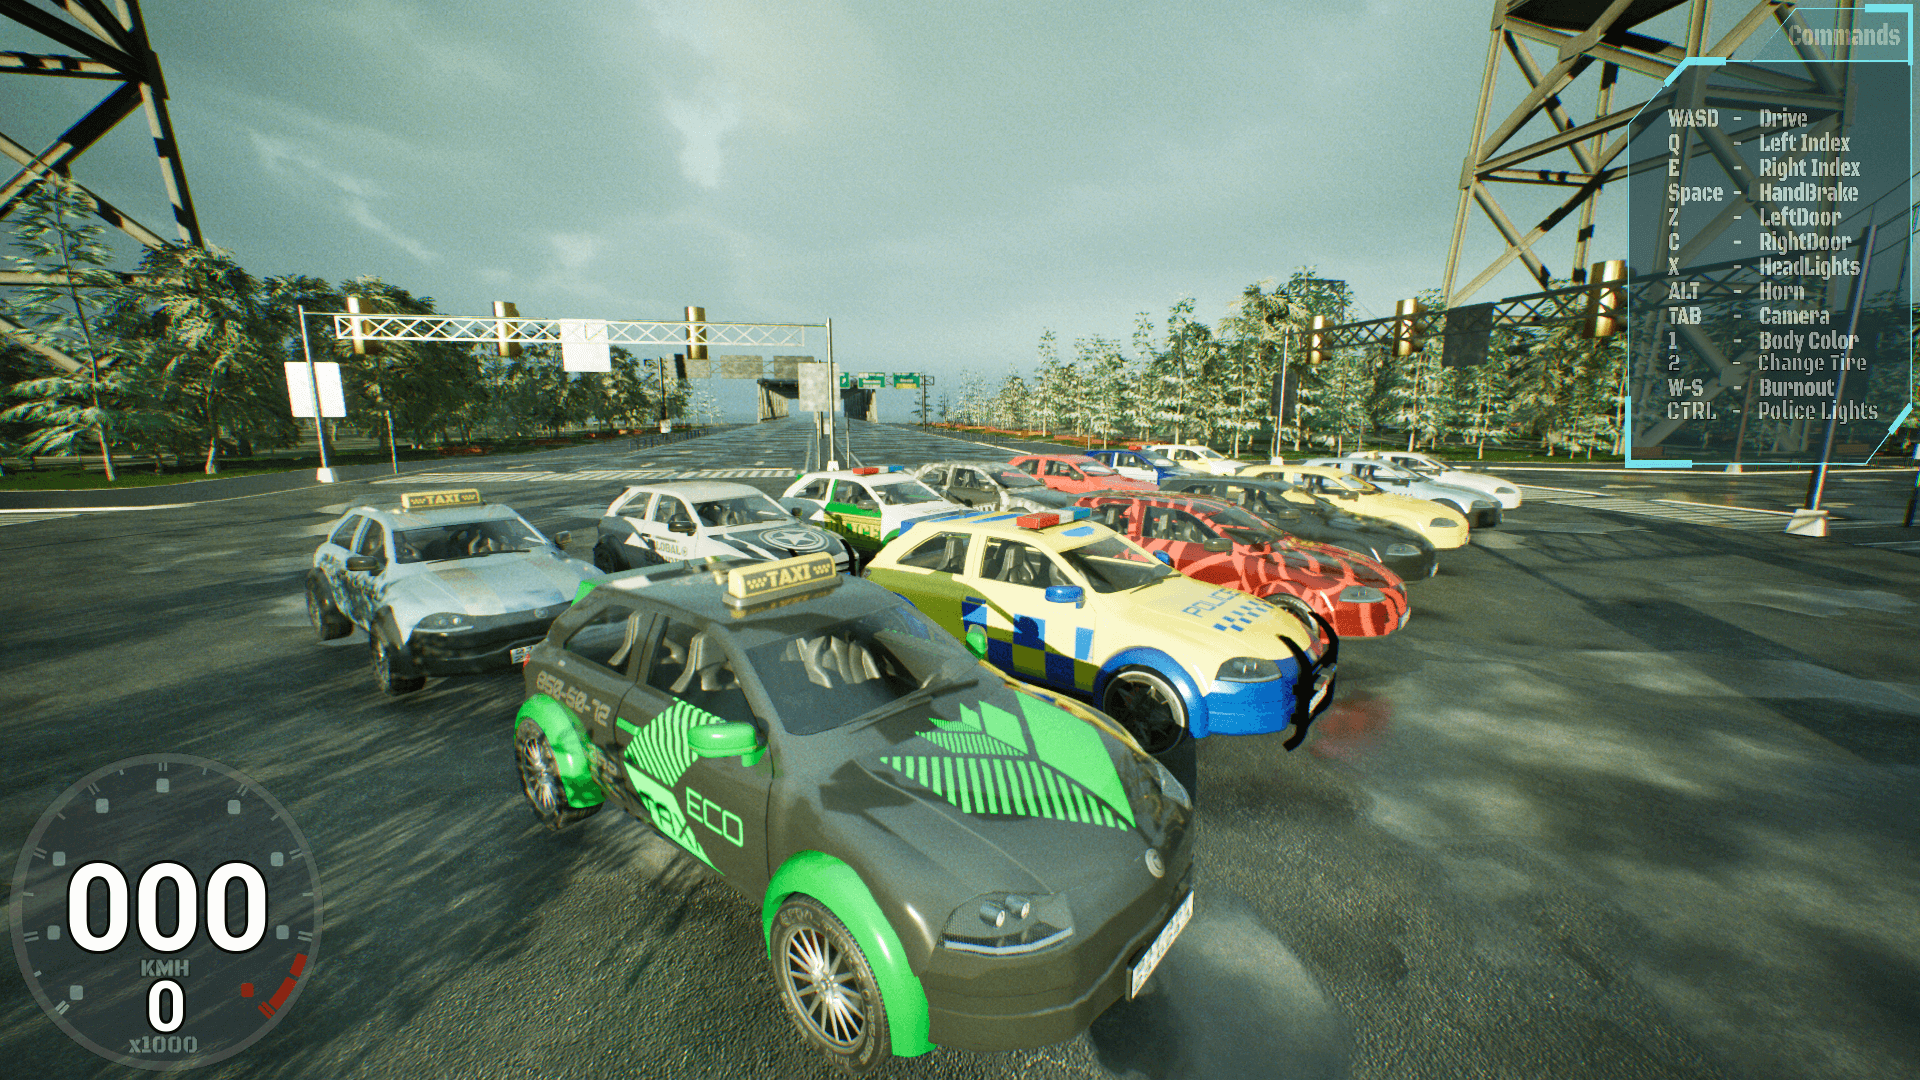 An image showing the Hatchback Bundle, created with Unreal Engine.